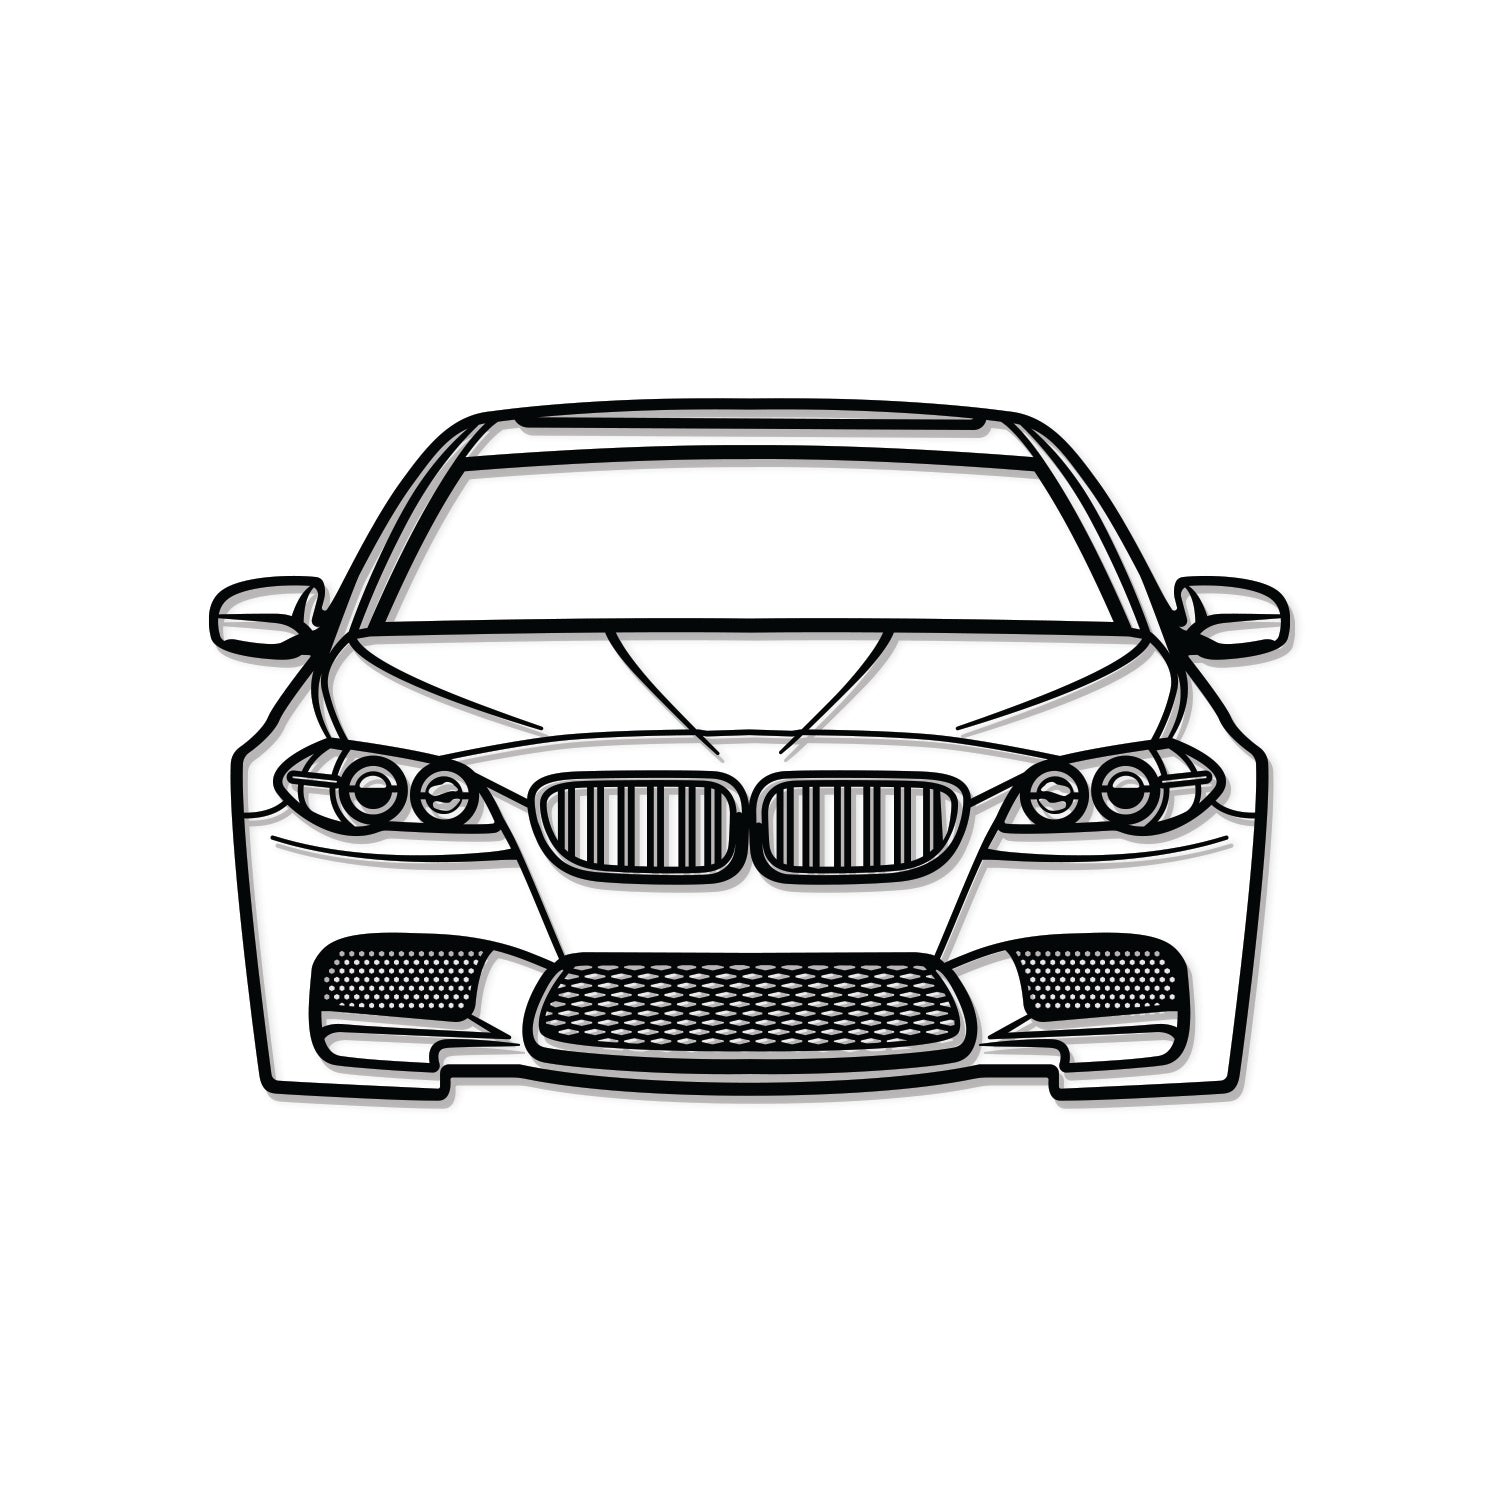 Compact Car Front View Drawing High-Res Vector Graphic - Getty Images